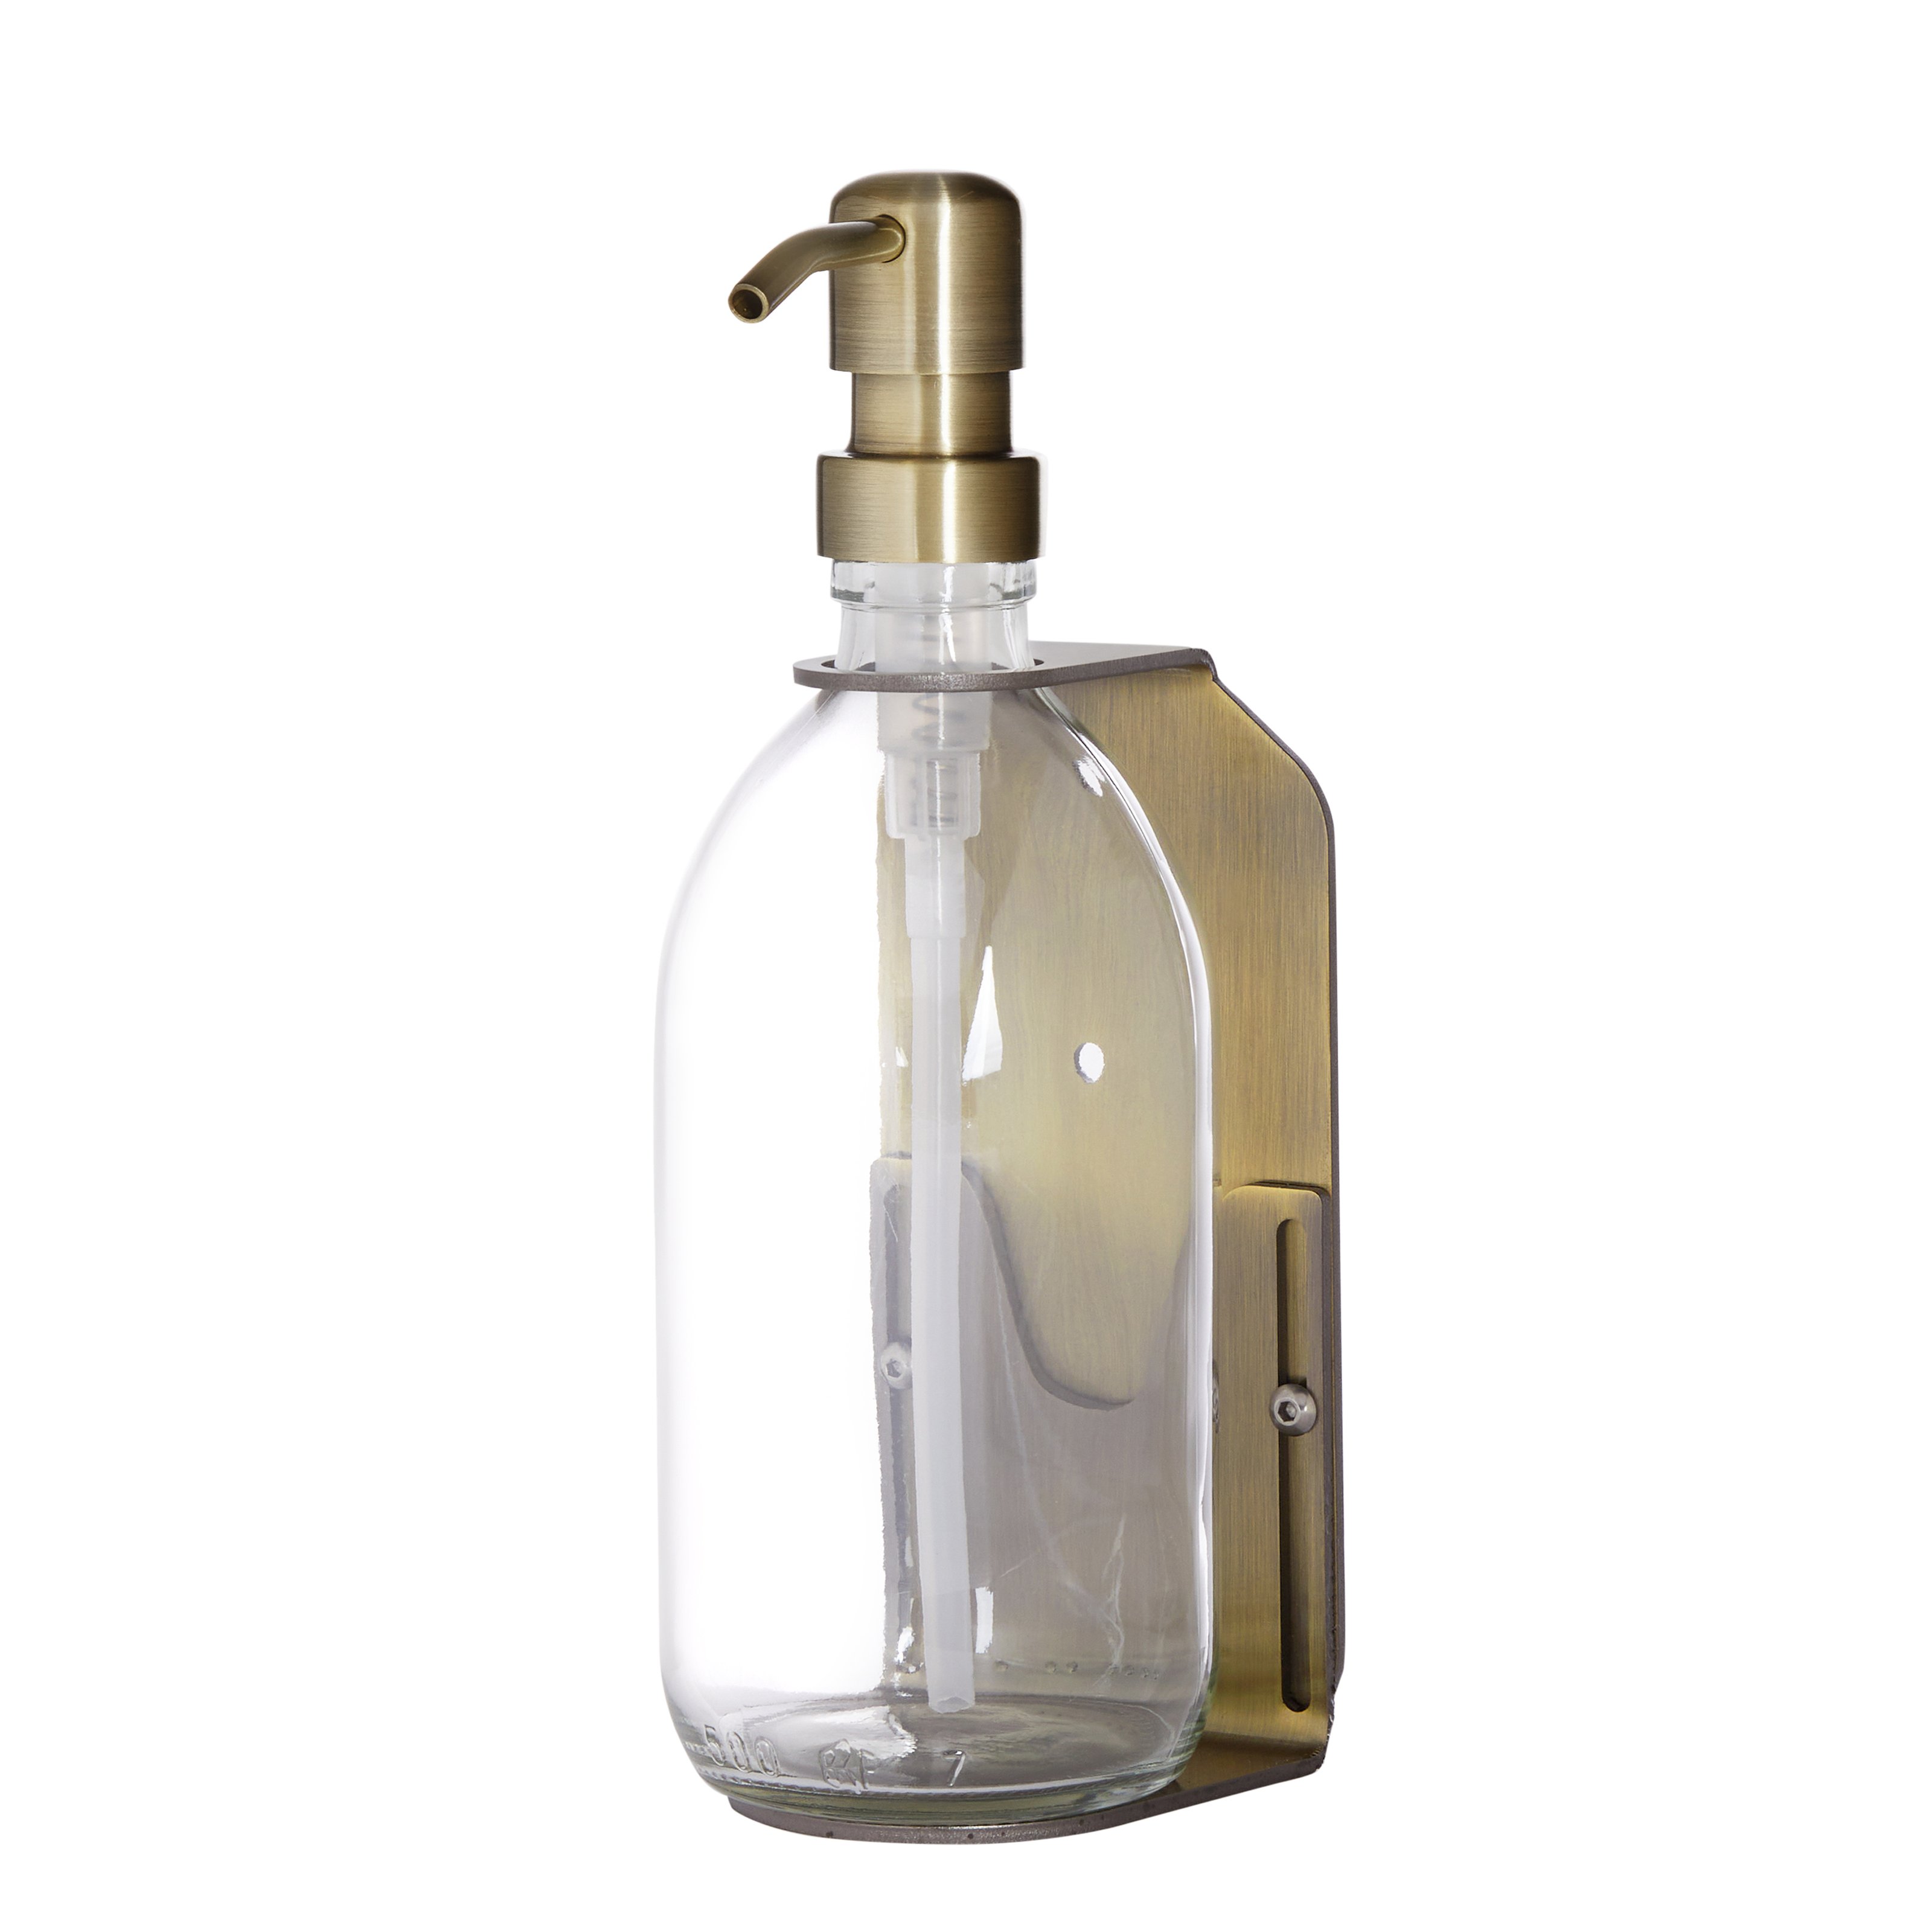 Gold Single bottle wall mounted holder with clear bottle dispenser and gold metal pump